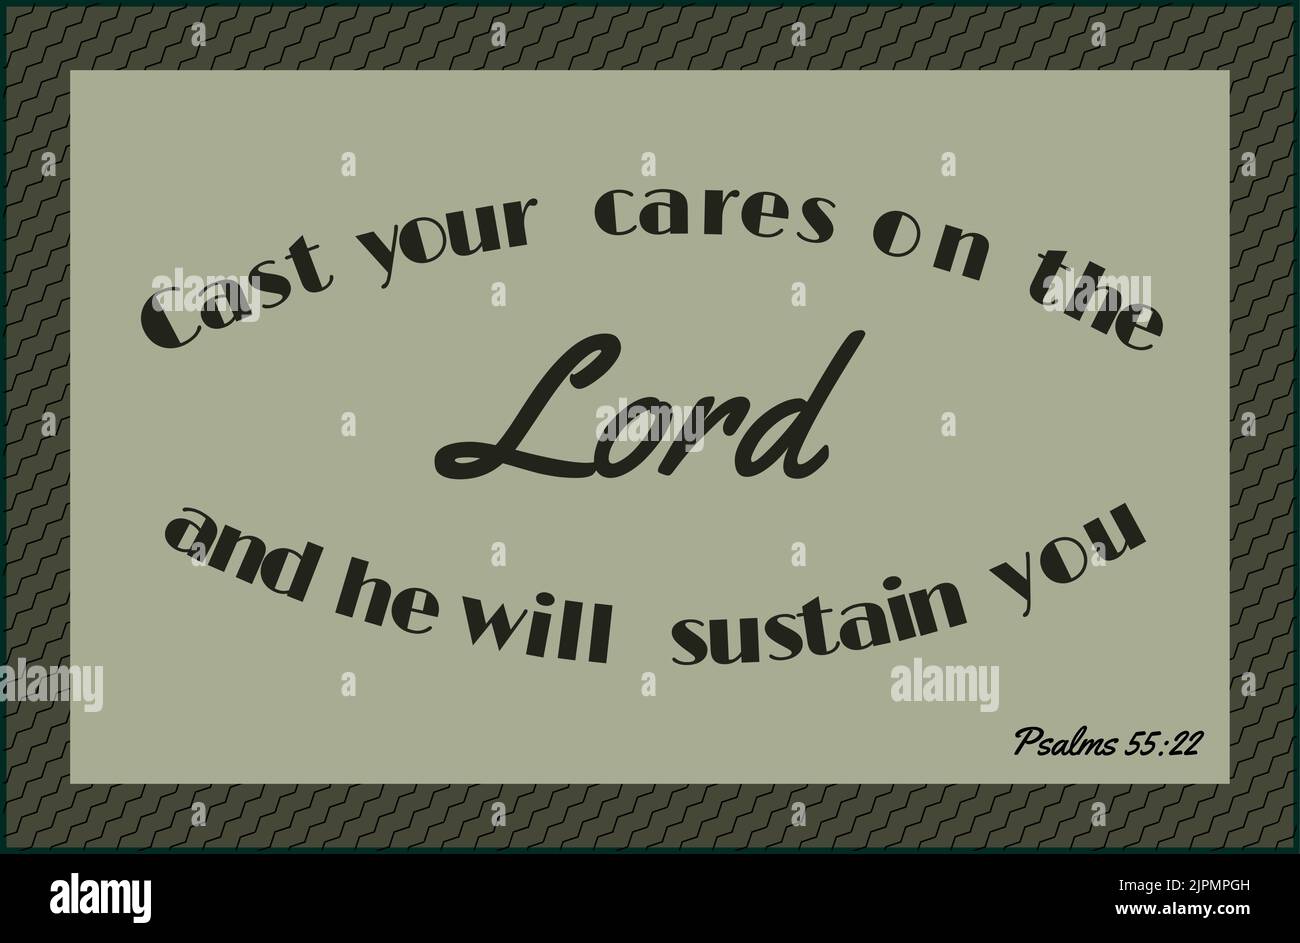 Vector: Bible text: cast your cares on the Lord, and he will sustain you. Psalms 55: 22. With colors light green and brown Stock Vector